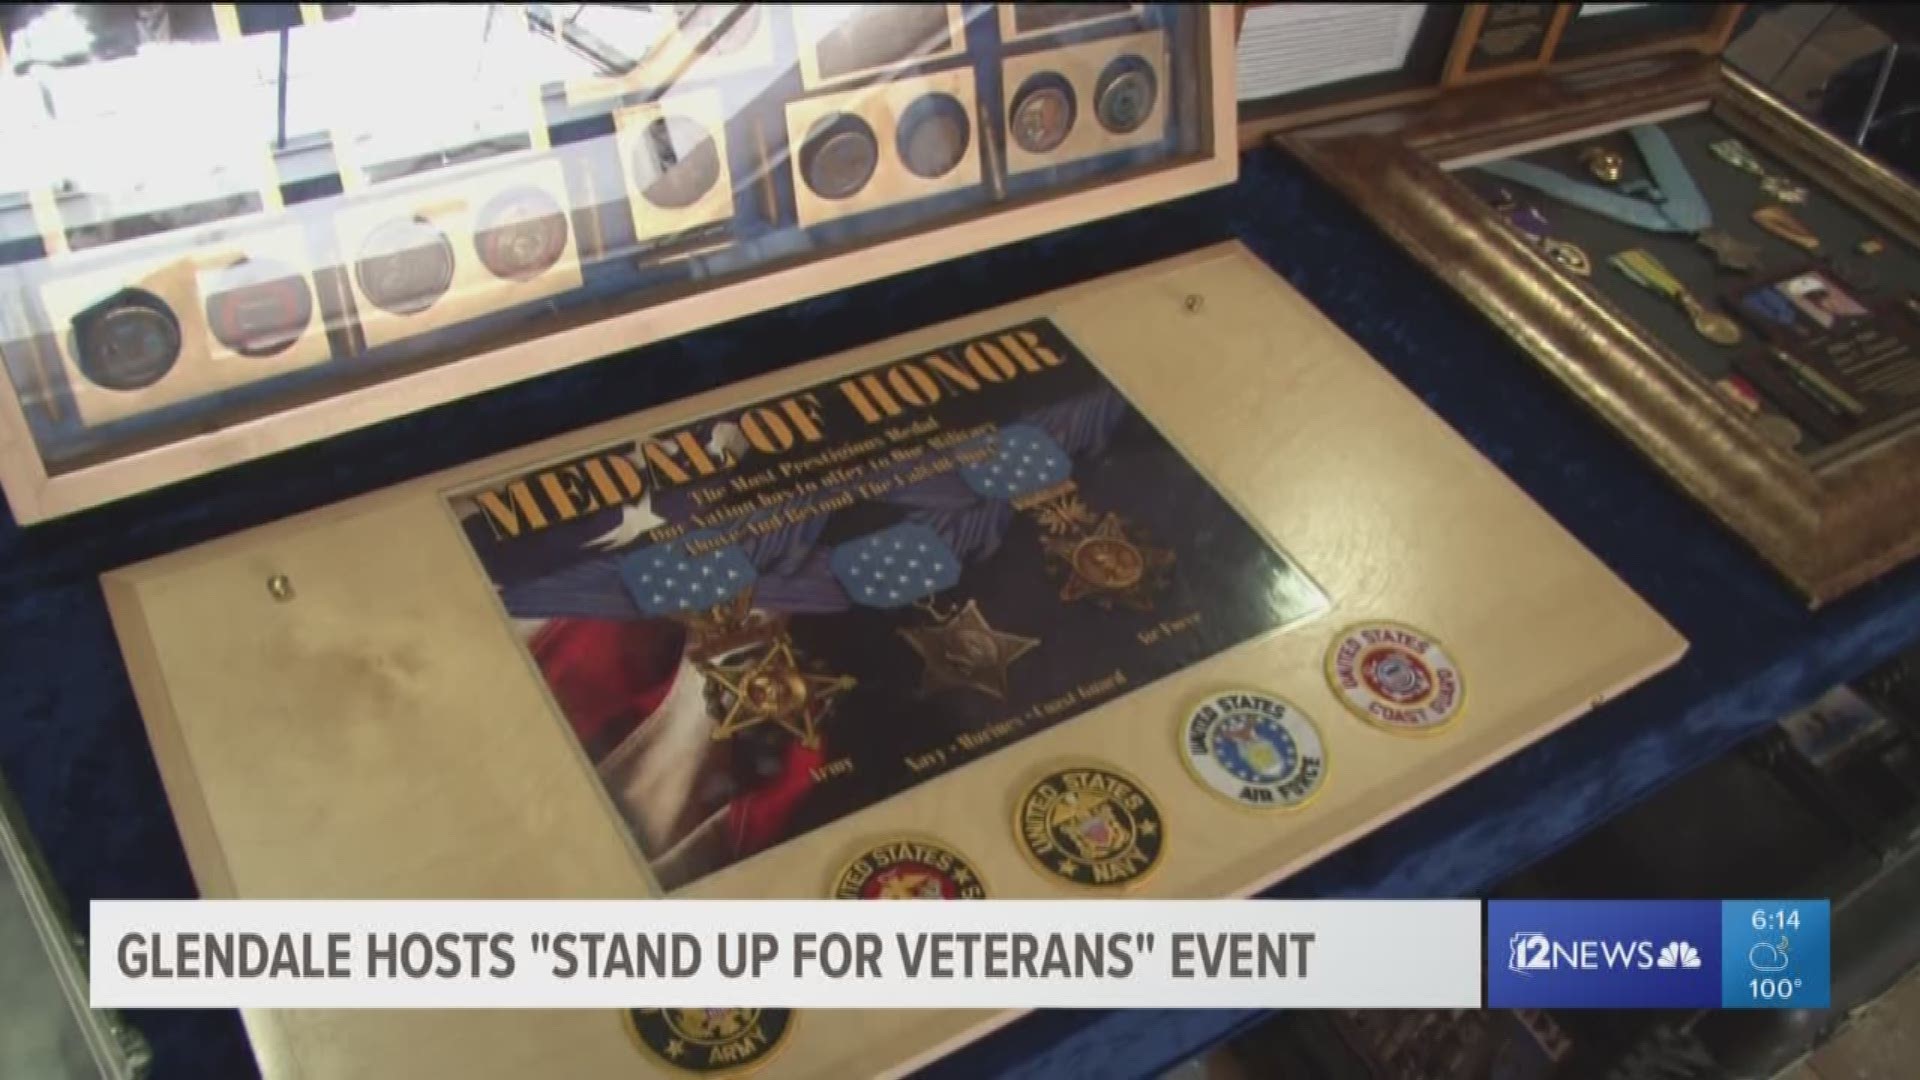 The event provided networking opportunities for veterans.